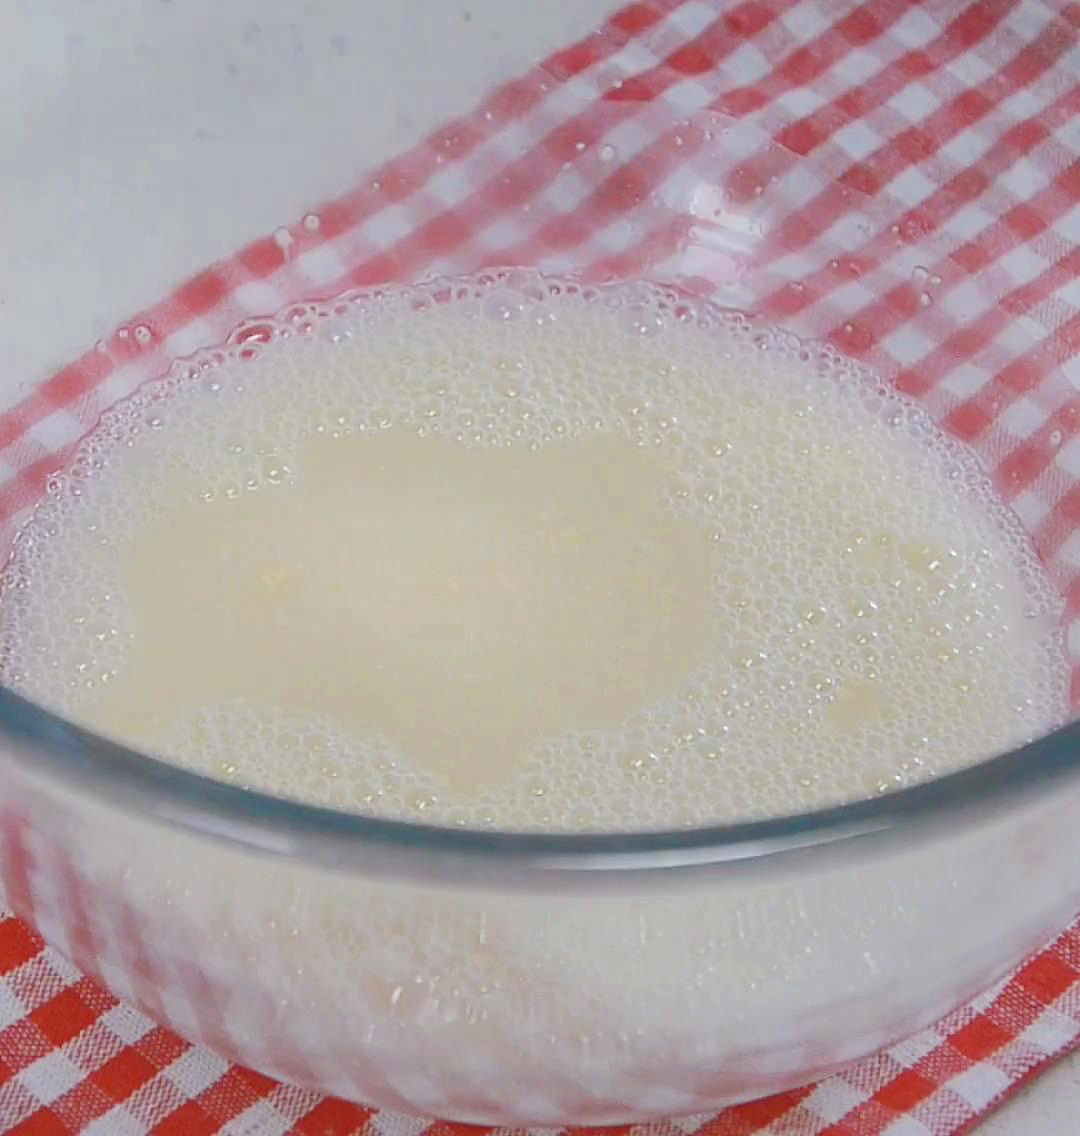 In a bowl, whisk water, sugar, yeast, and salt